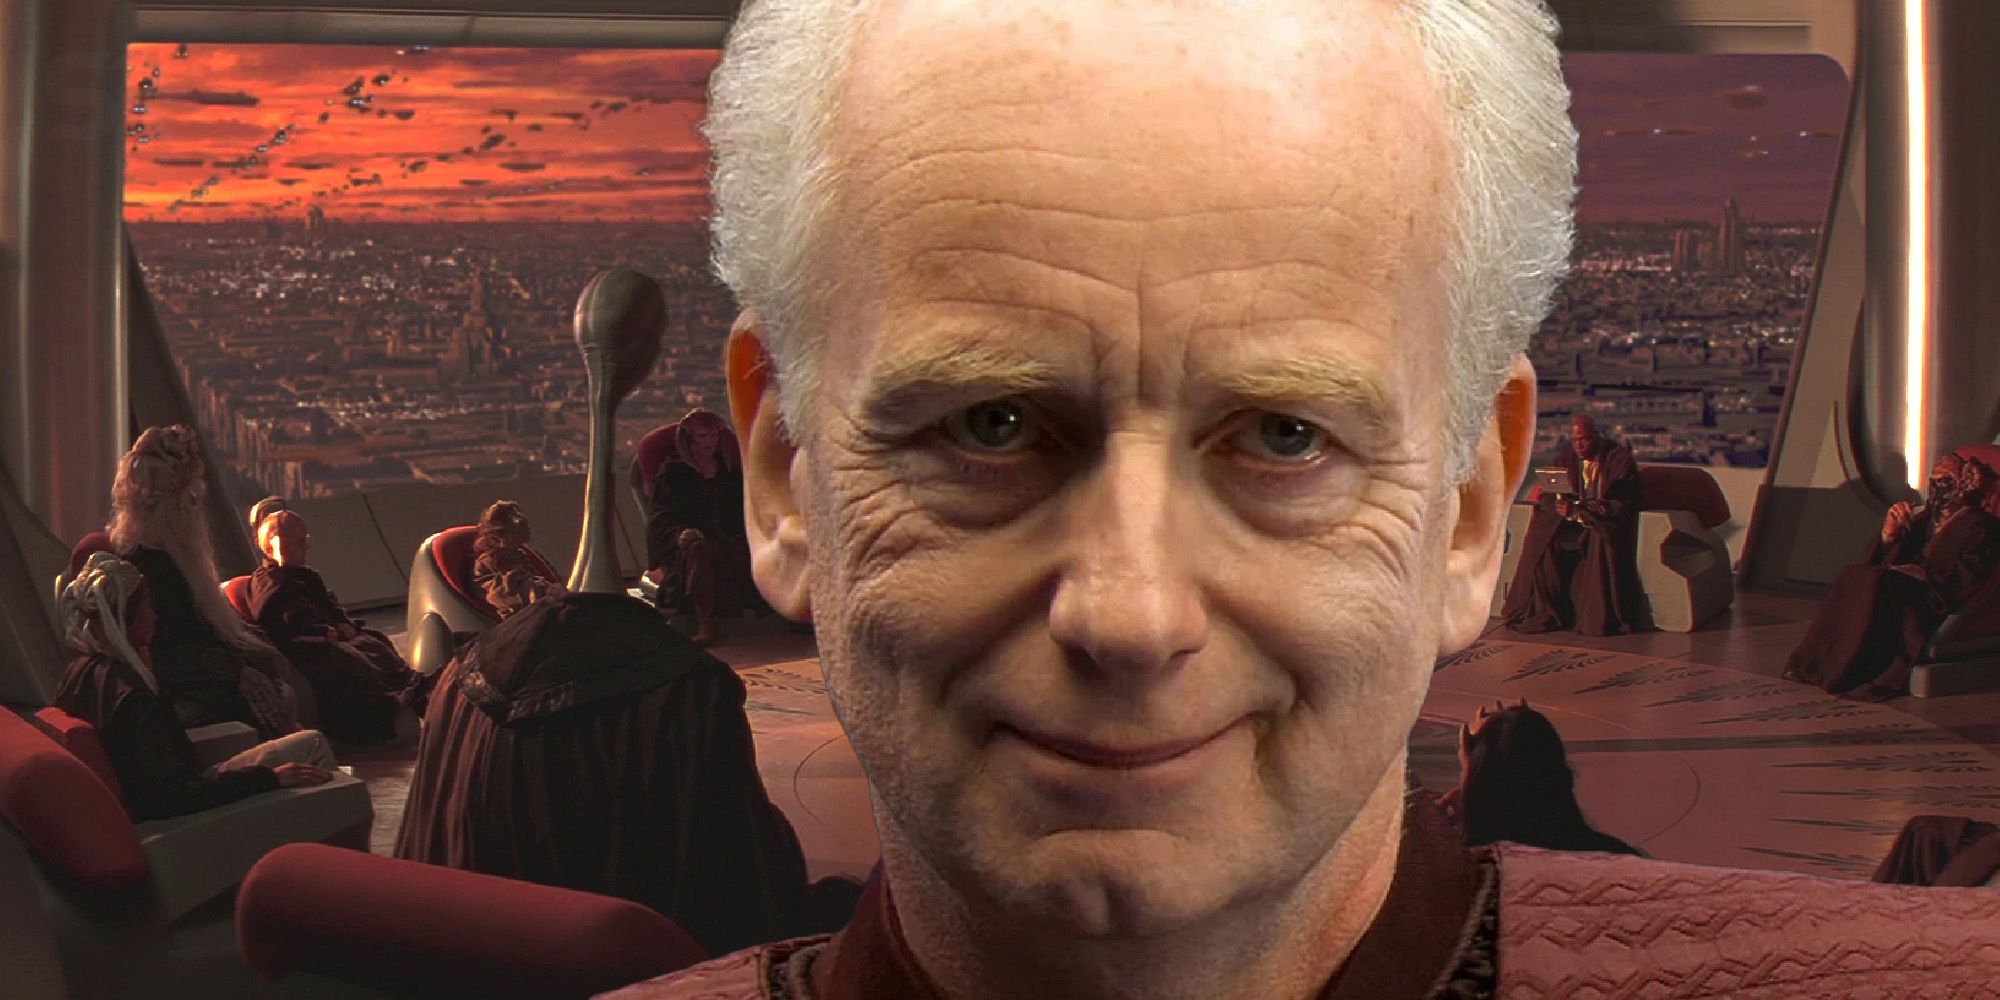 Star Wars Theory: Why The Jedi Never Sensed Palpatine’s Force Power As A Child